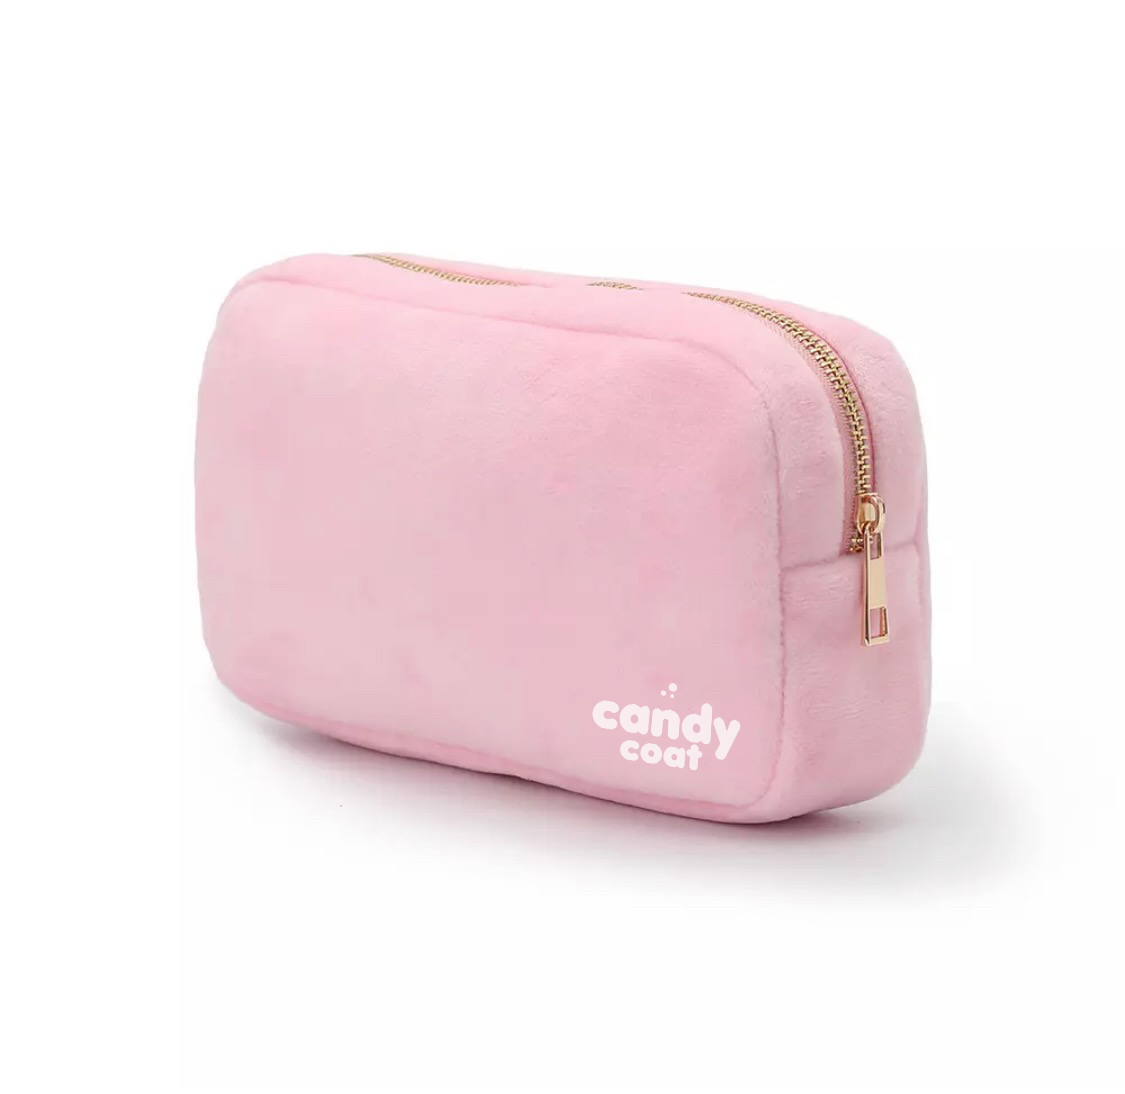 Candy Coat - Candy Pouch